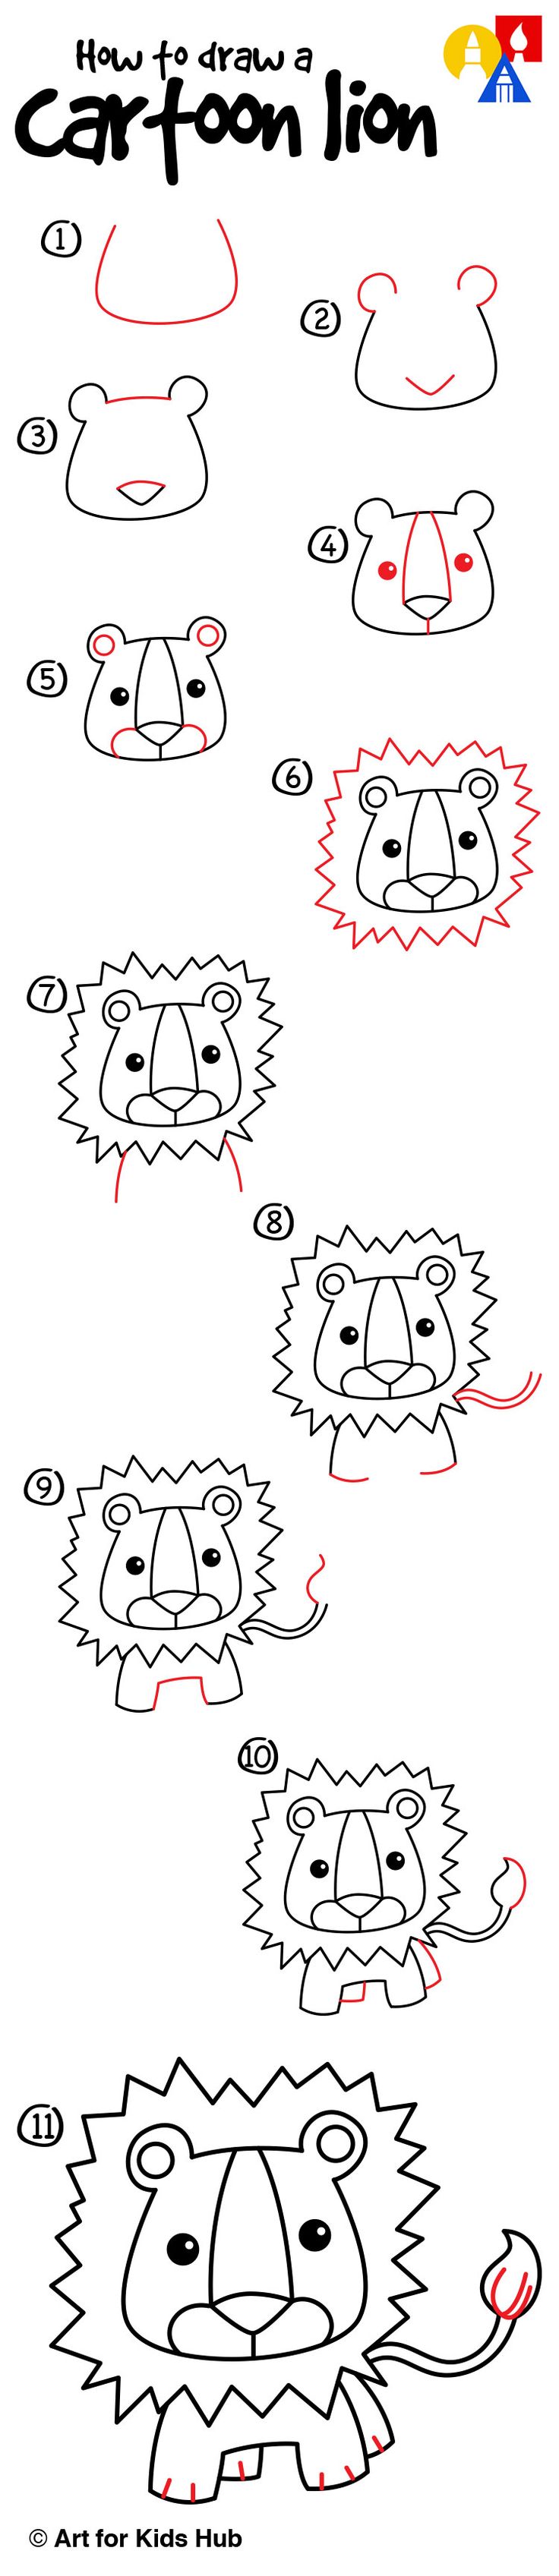 Learn how to draw a cartoon lion! Wallpaper